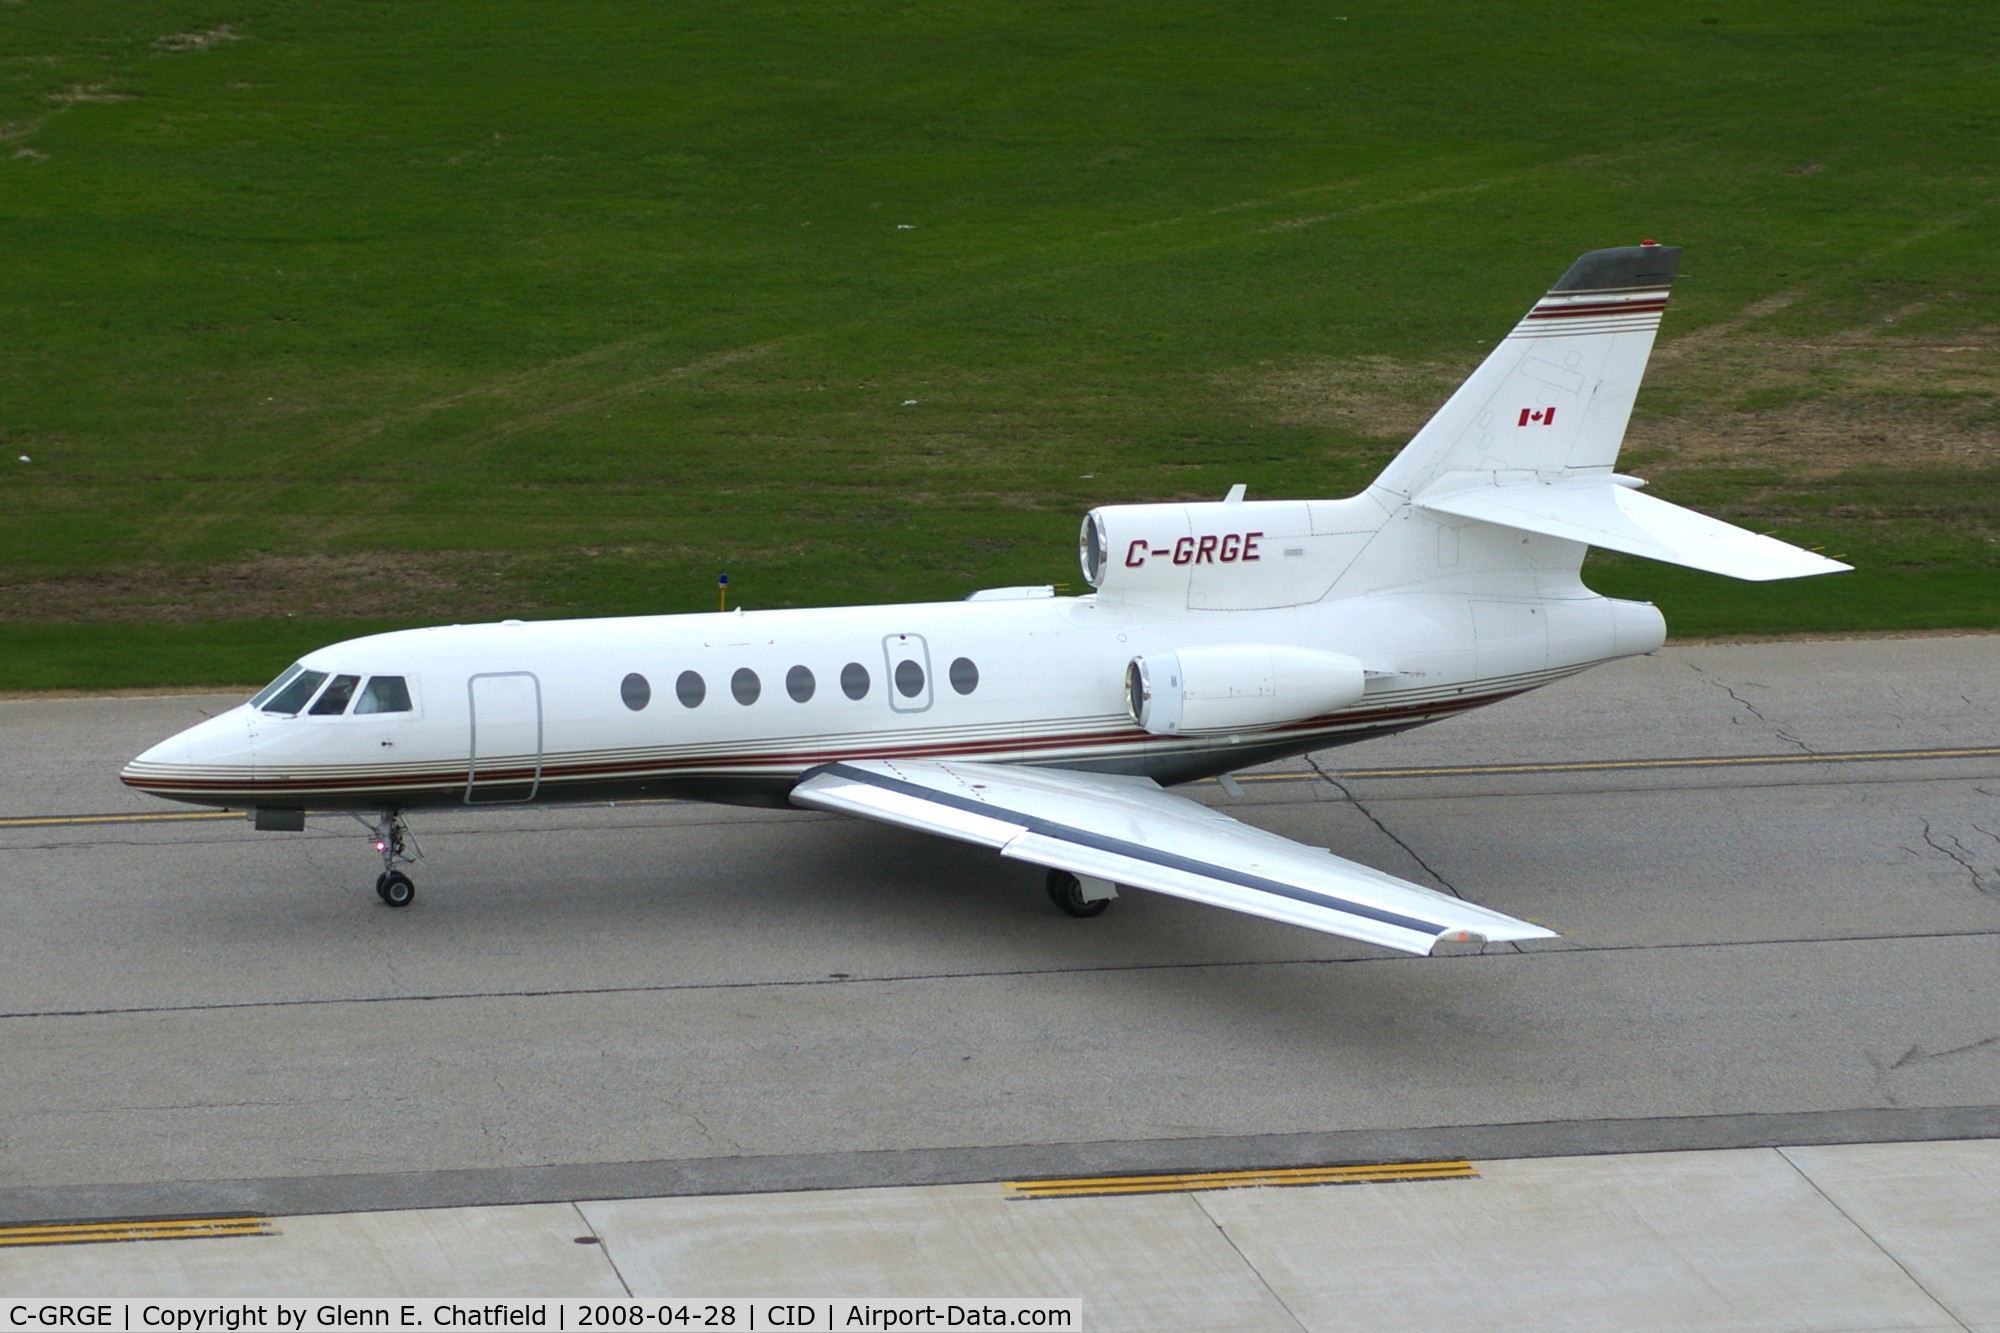 C-GRGE, 1981 Dassault Falcon 50 C/N 29, Taxiing to Runway 31 for departure to Mexico